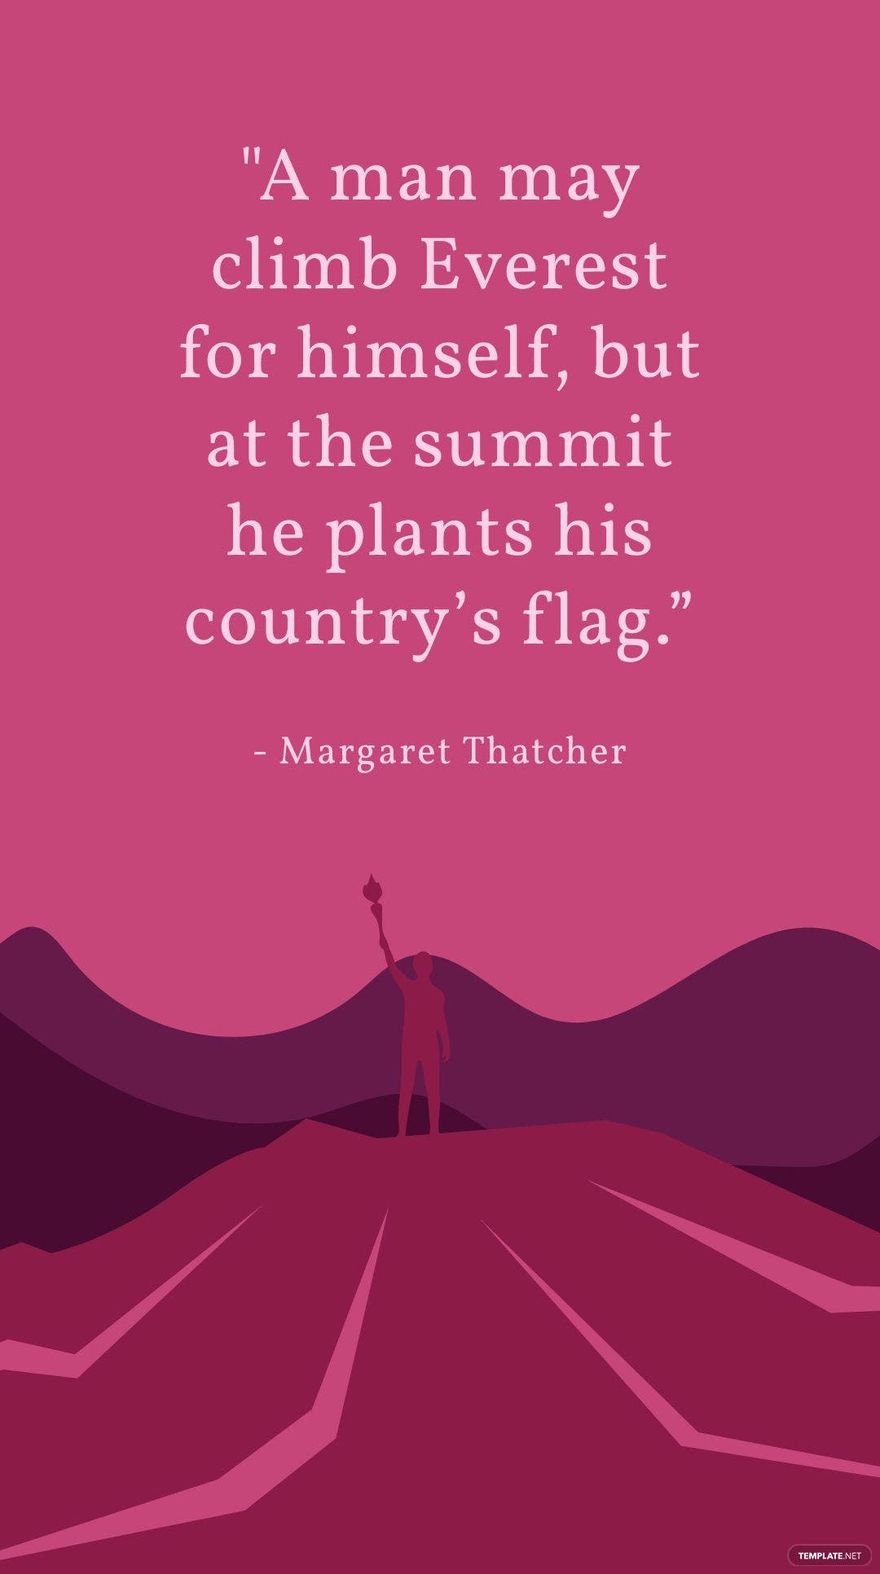 Margaret Thatcher - "A man may climb Everest for himself, but at the summit he plants his country’s flag.”